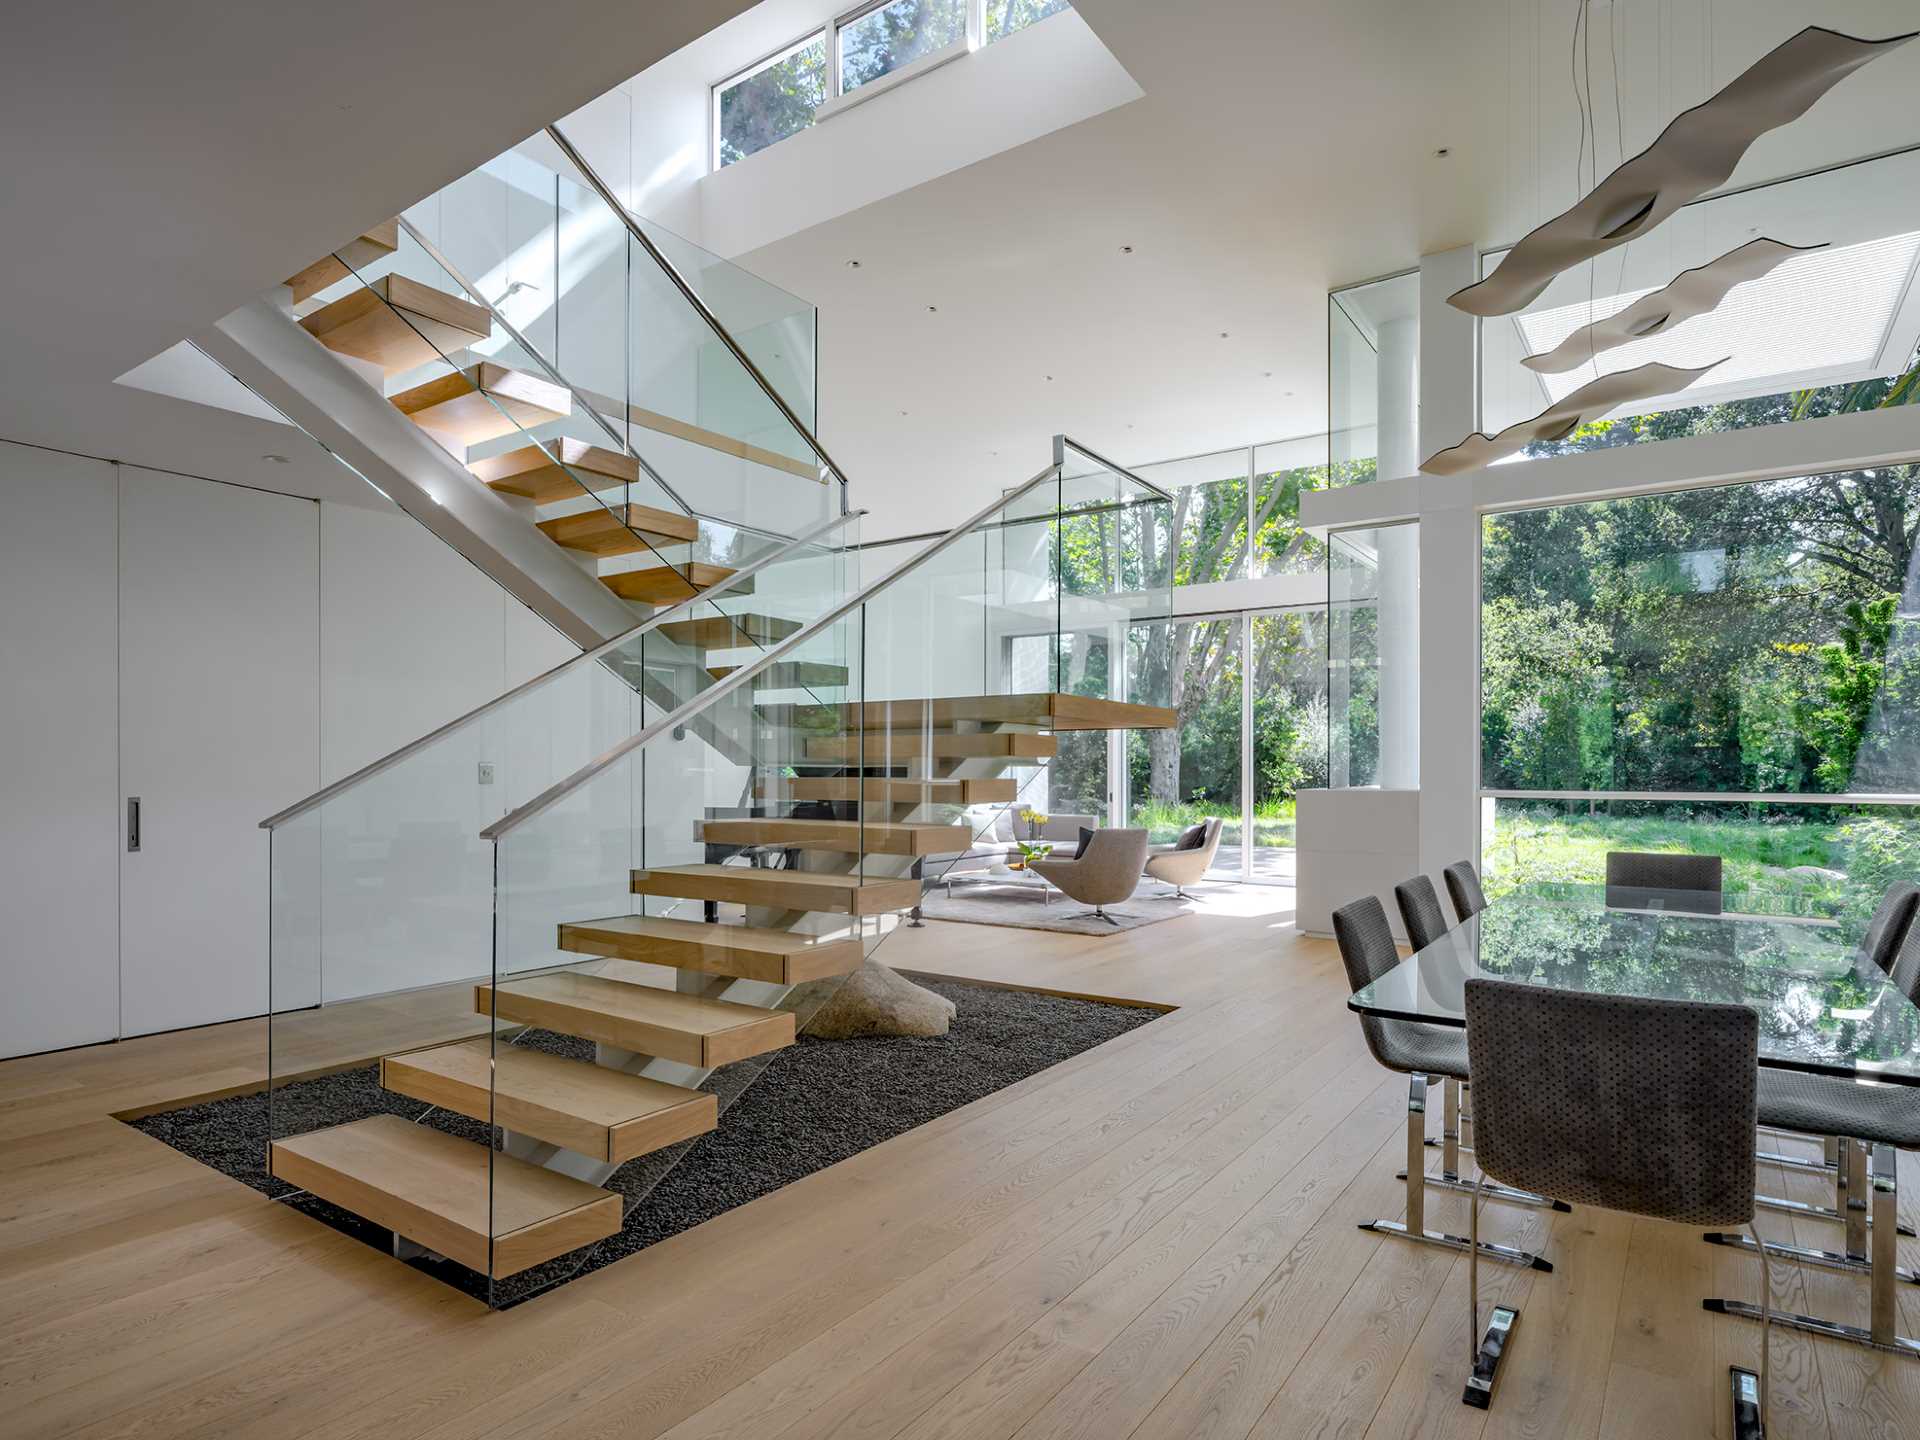 A free-standing, steel-framed stair is treated like a work of functional sculpture, hovering above an interior garden of gravel and a single boulder.